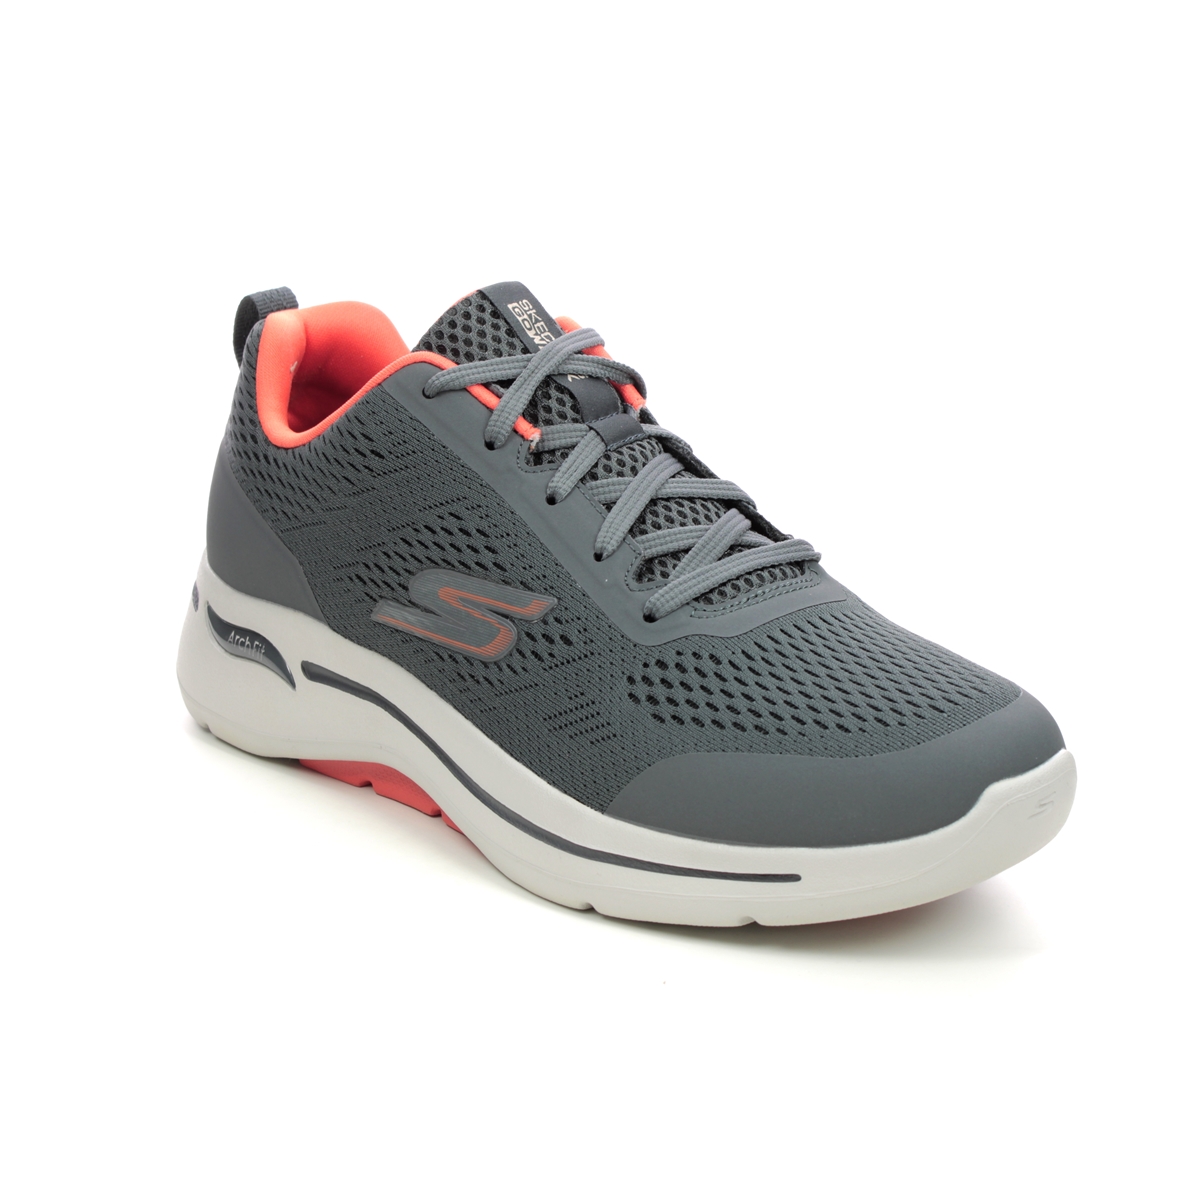 Skechers Arch Fit Go Walk Charcoal Grey Mens Trainers 216116 In Size 8 In Plain Charcoal Grey